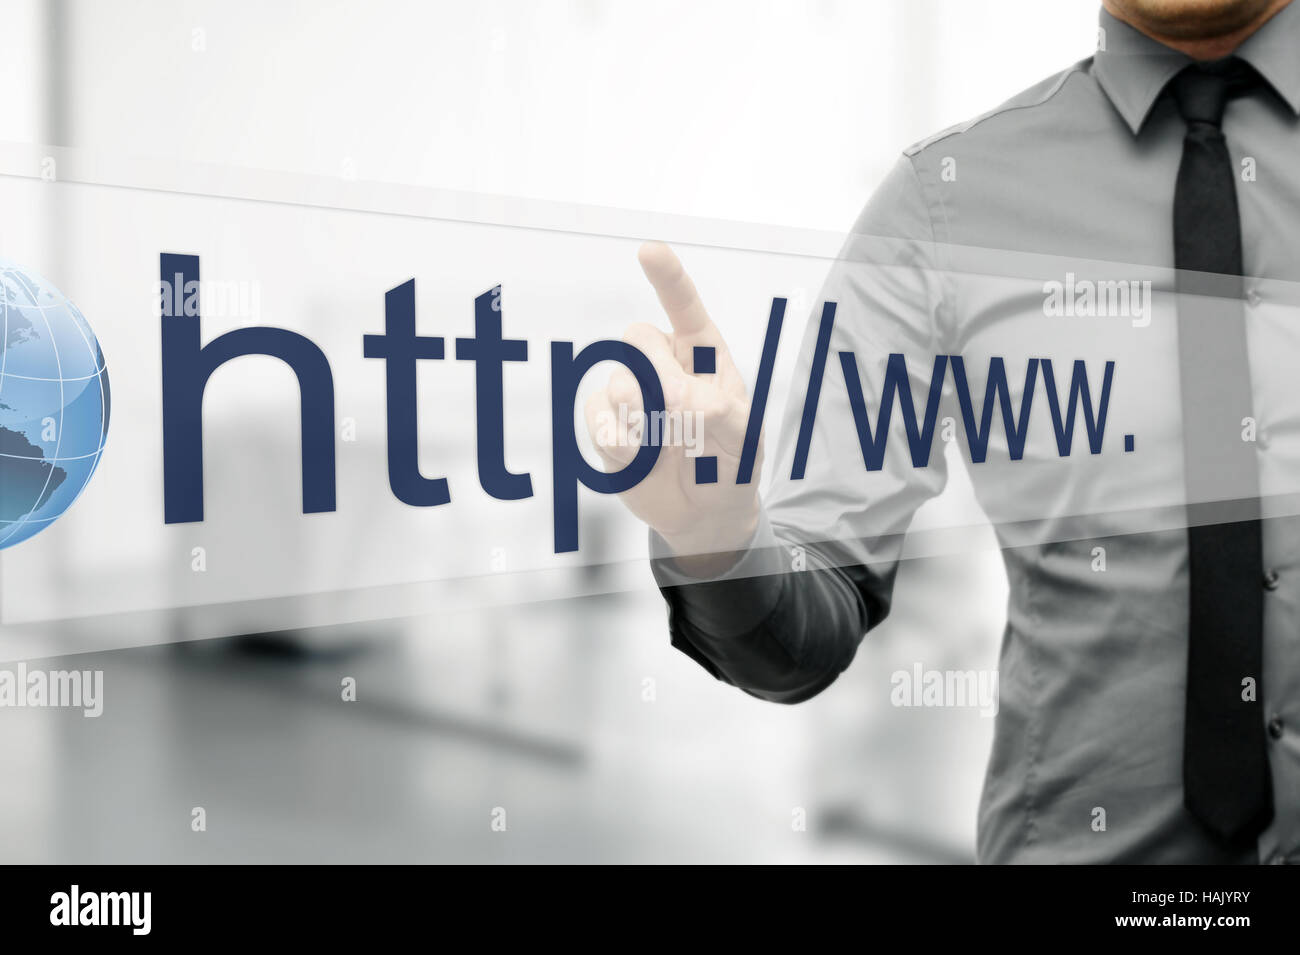 internet address in web browser on virtual screen Stock Photo